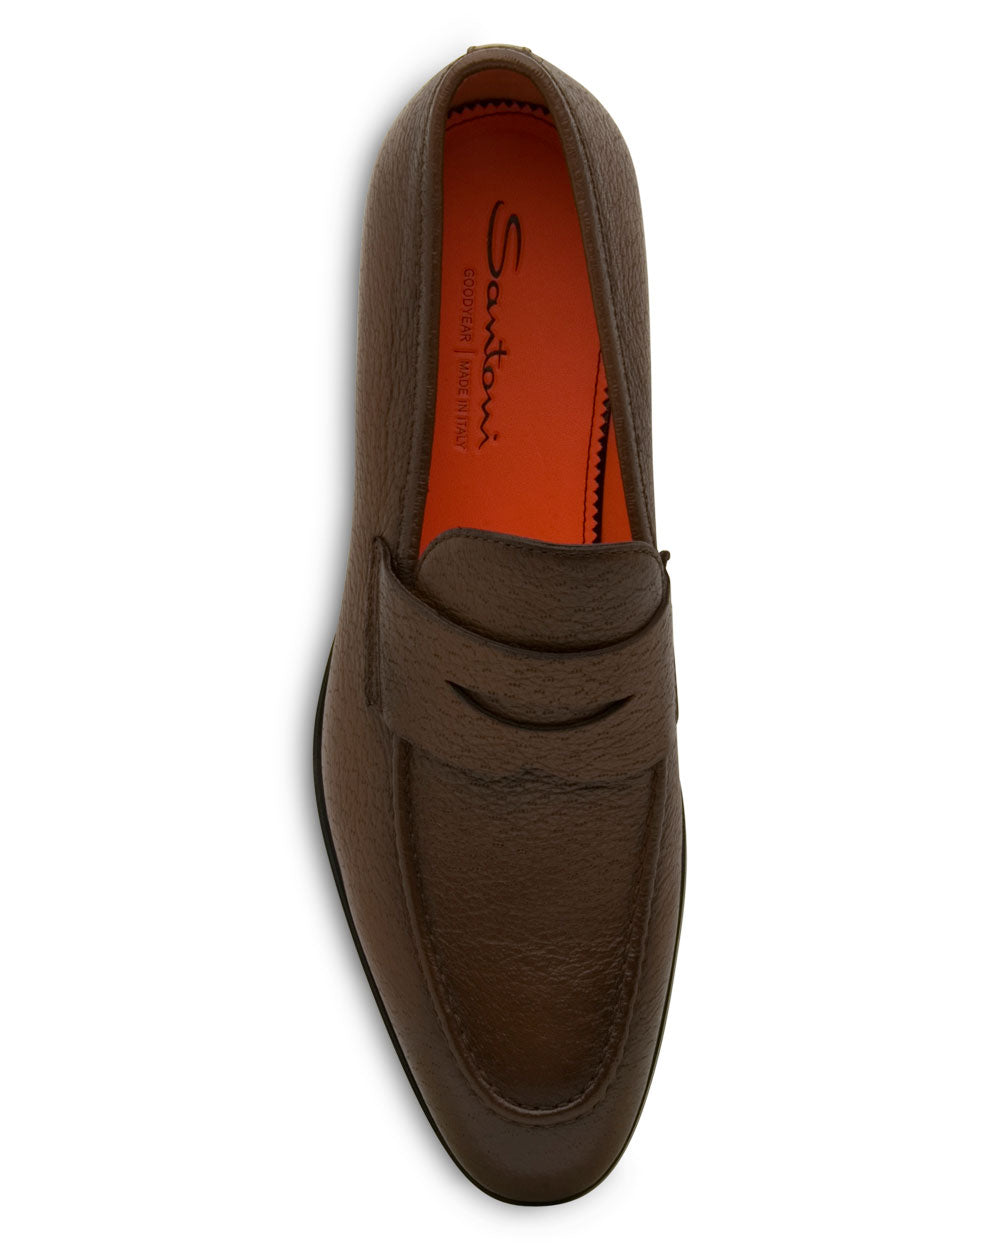 Leather Loafer in Light Brown